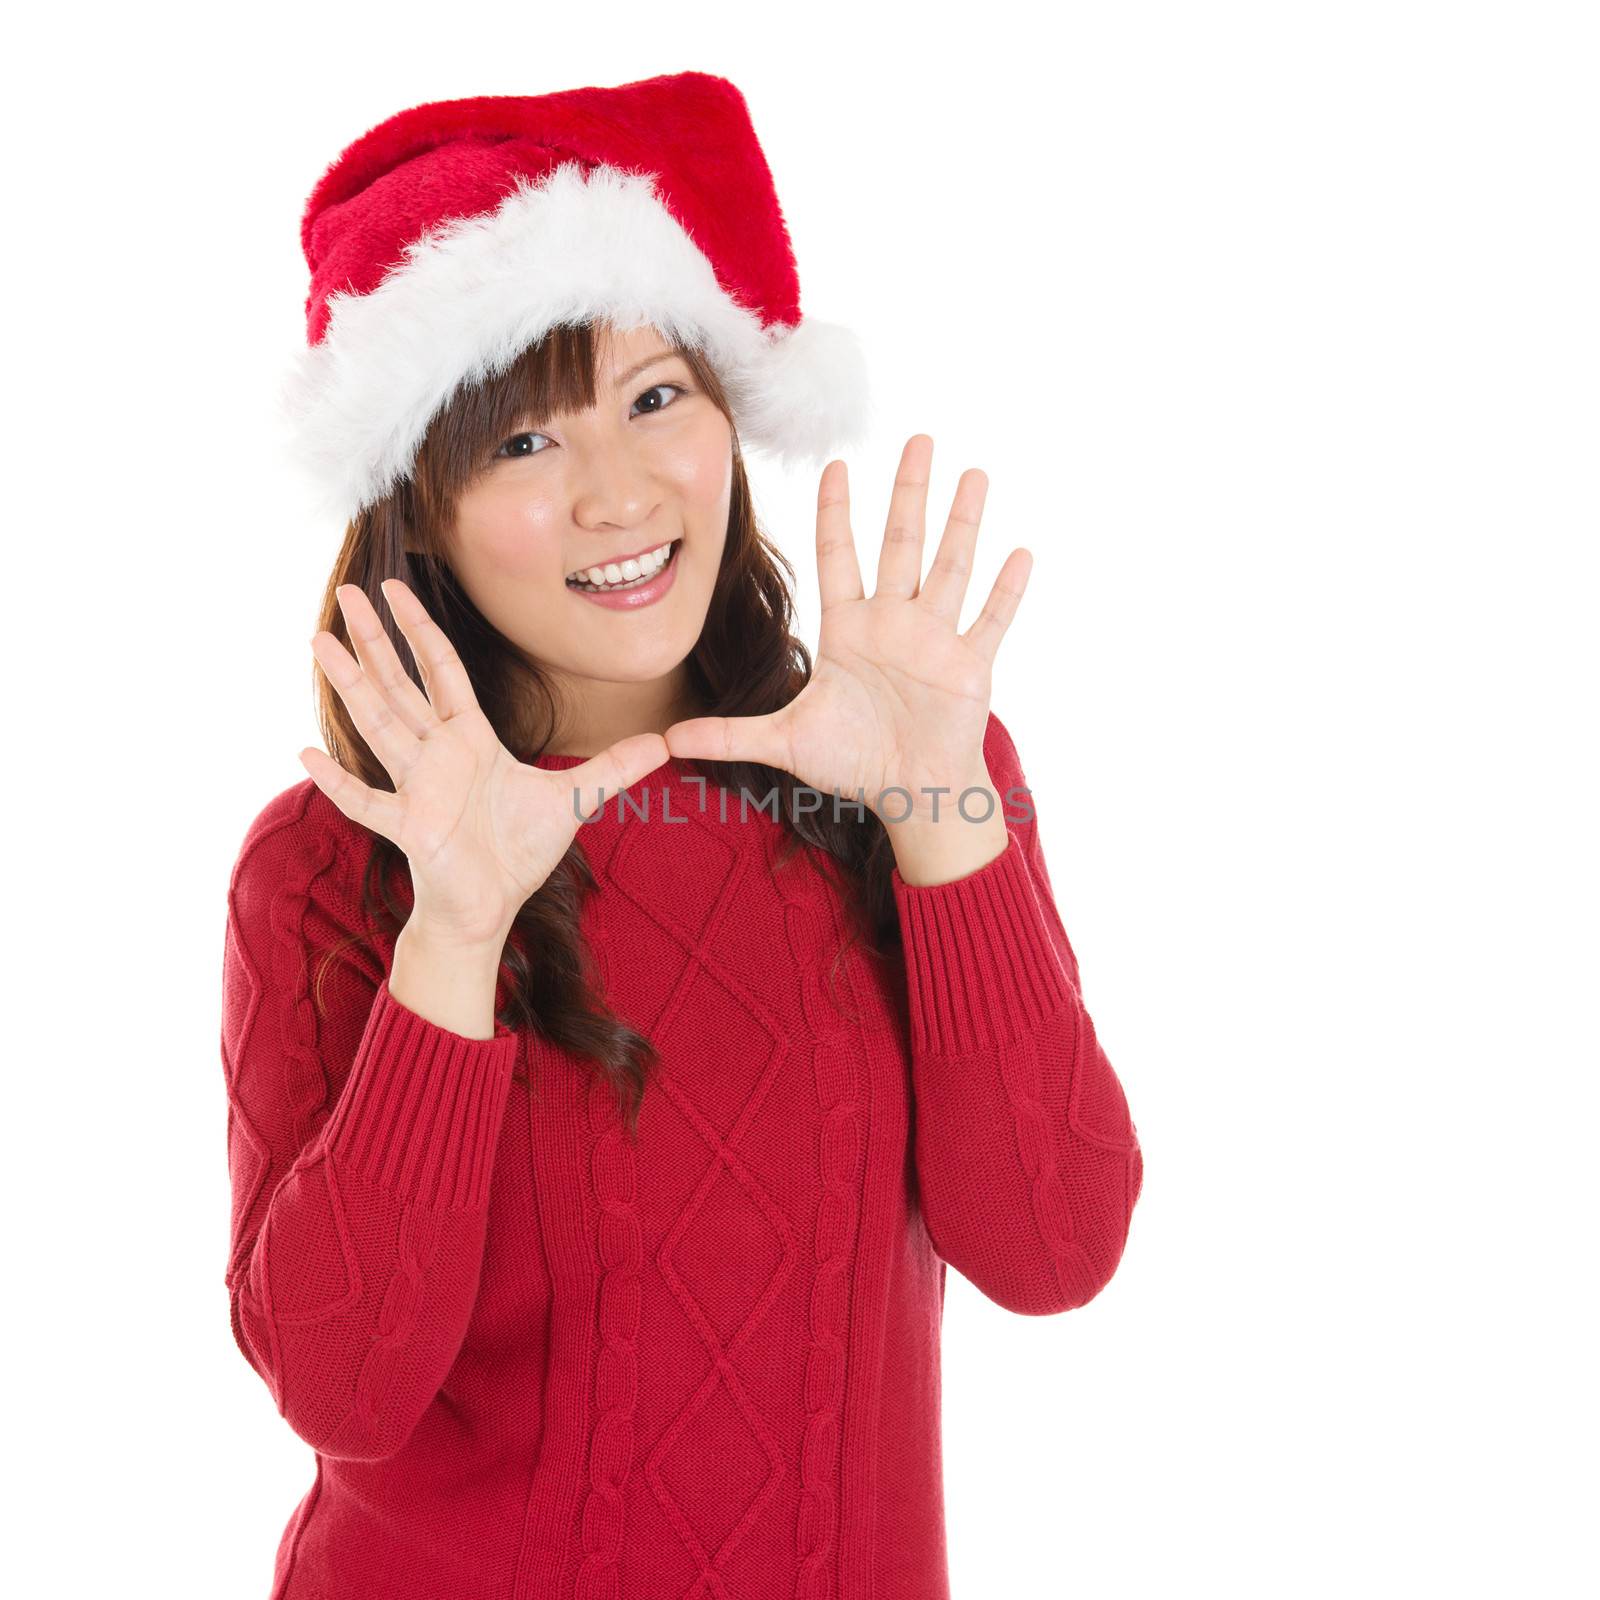 Happy Christmas woman excited say hello isolated on white background wearing red Santa hat. Beautiful Asian model.